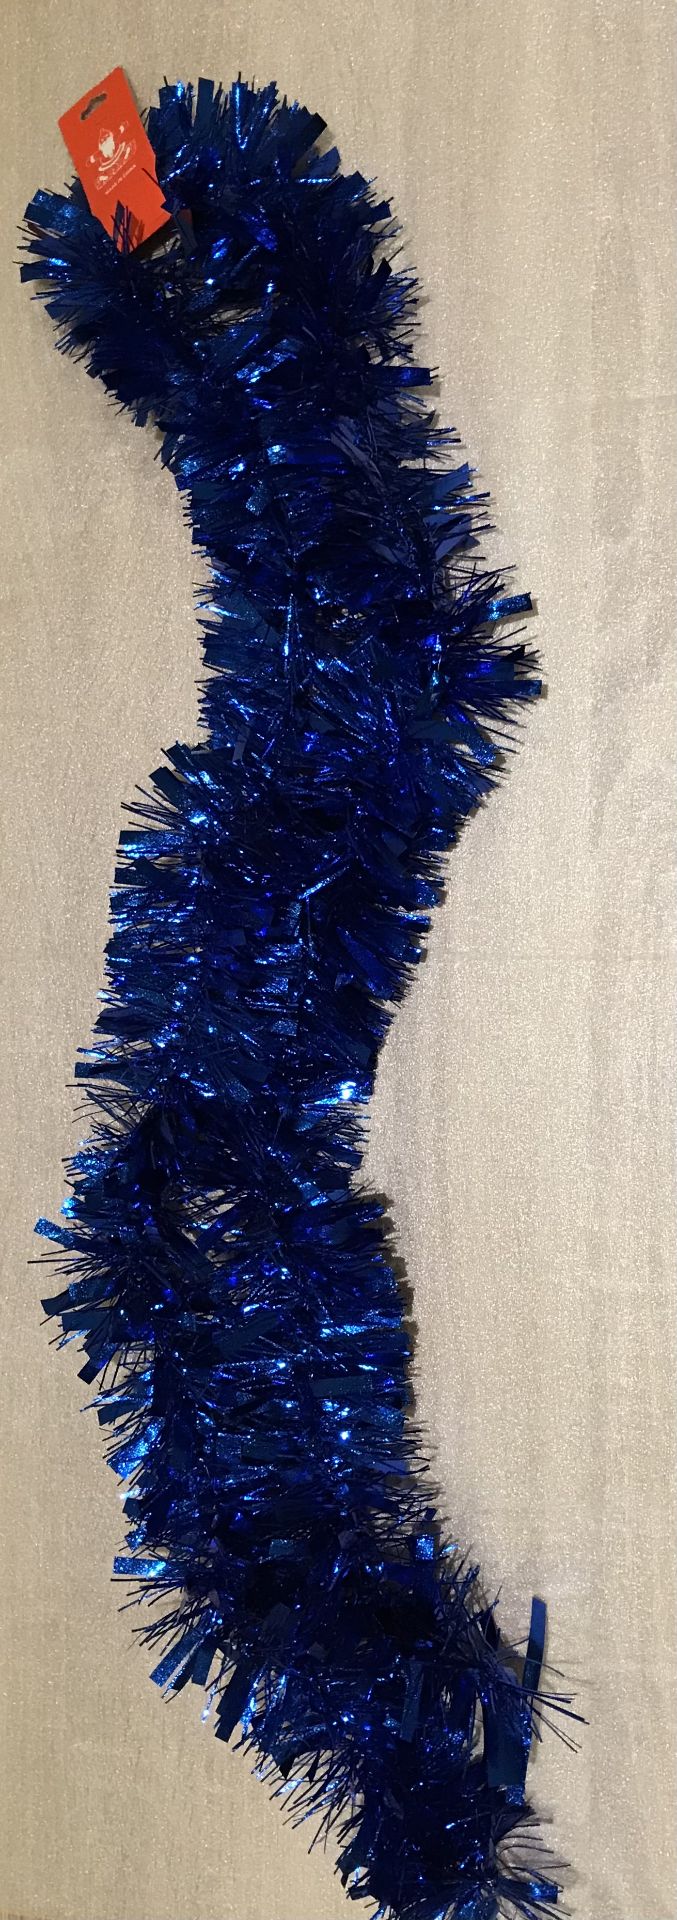 500 X Luxury Tinsel 1.8M 5 Colours Gold, Silver, Red, Blue, Green - Image 5 of 6